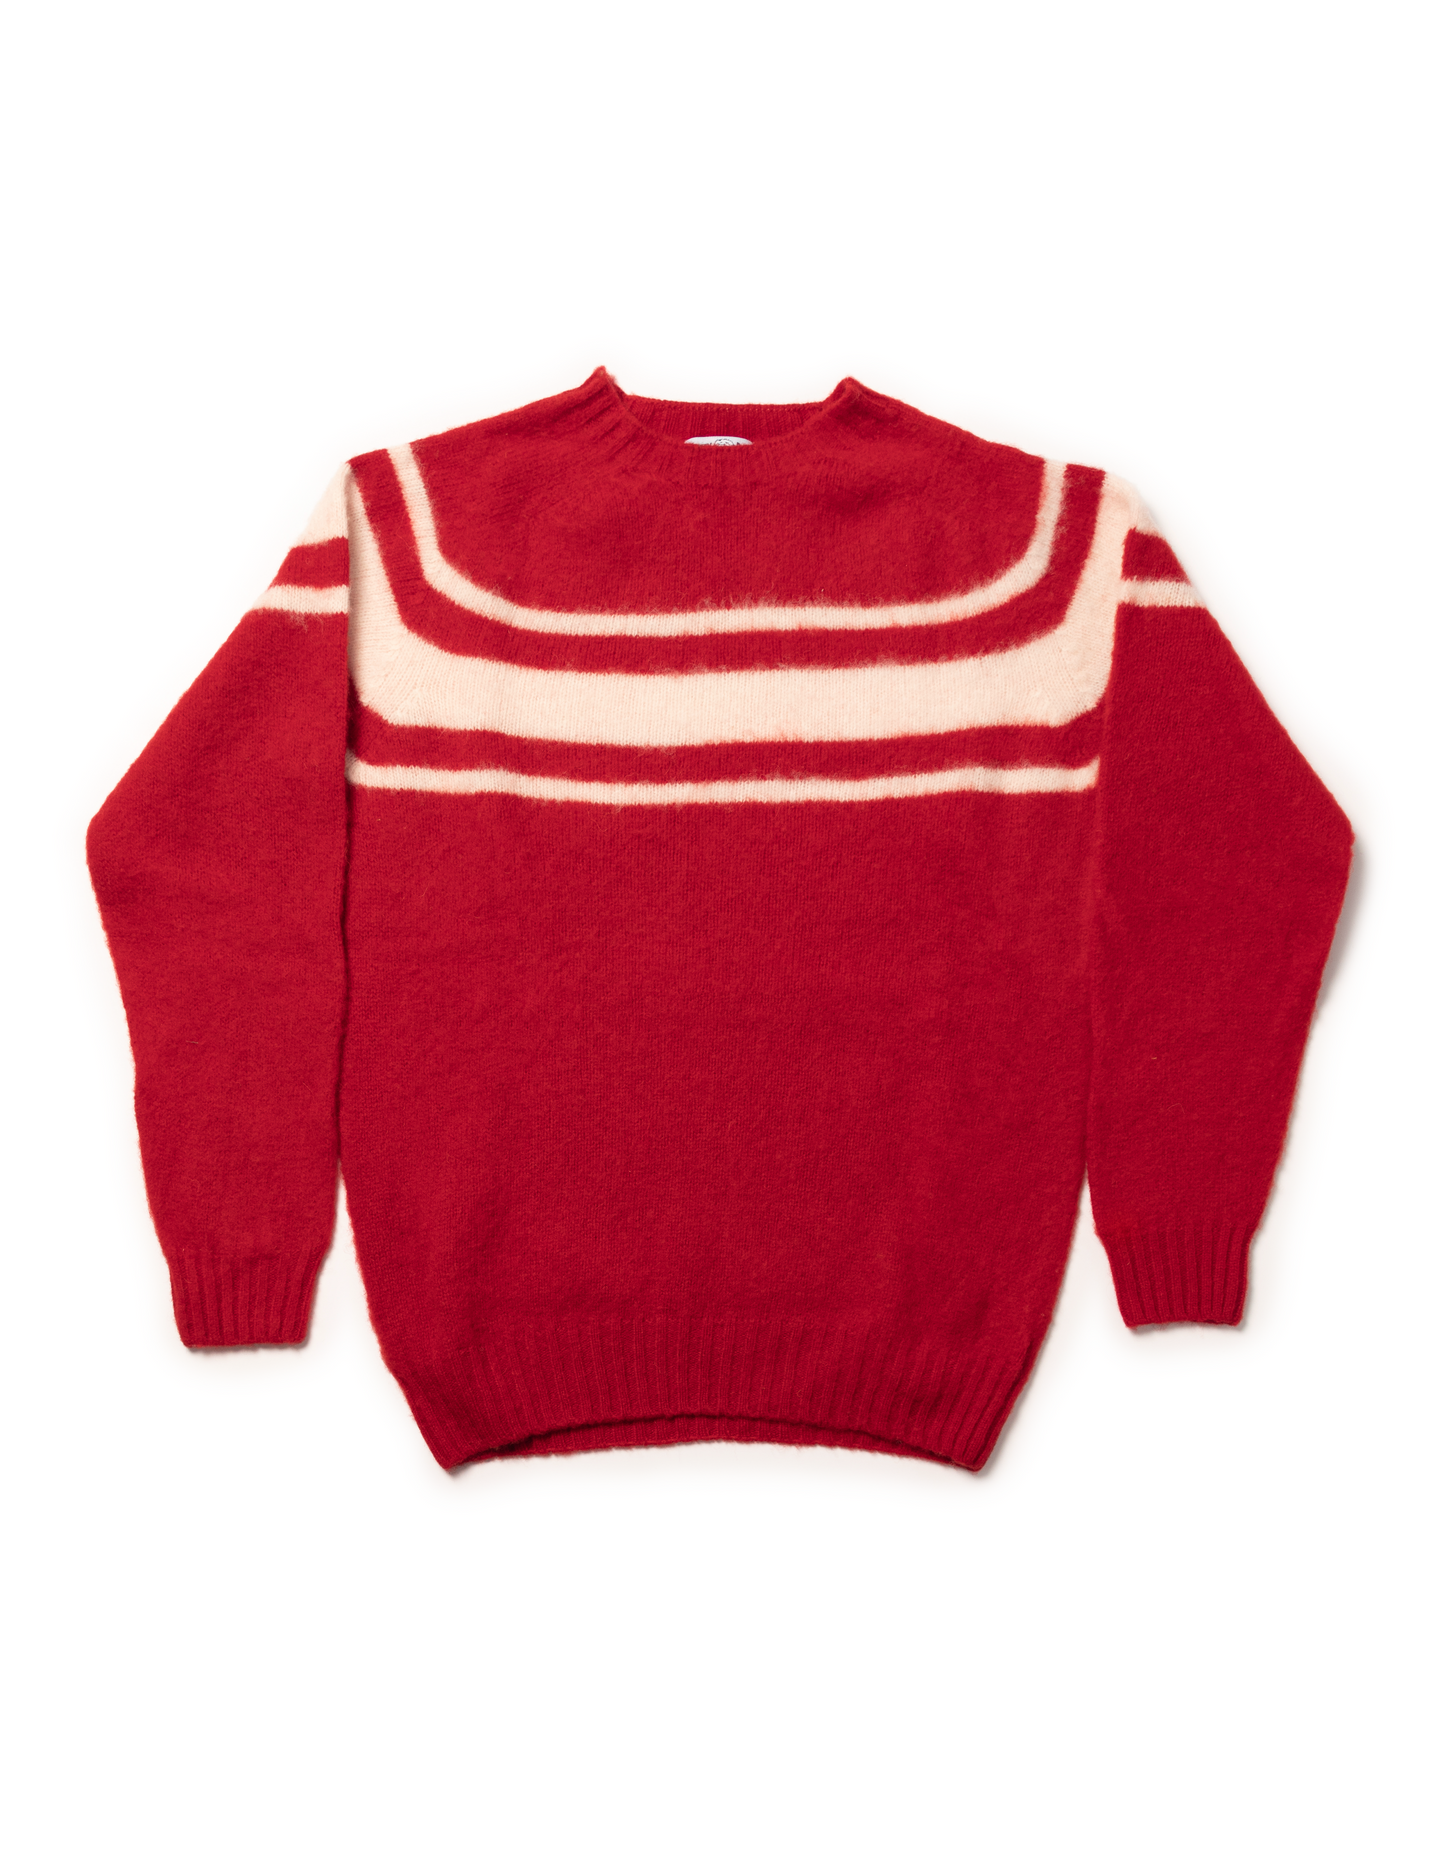 SHAGGY DOG SWEATER RED CHEST STRIPE - TRIM FIT